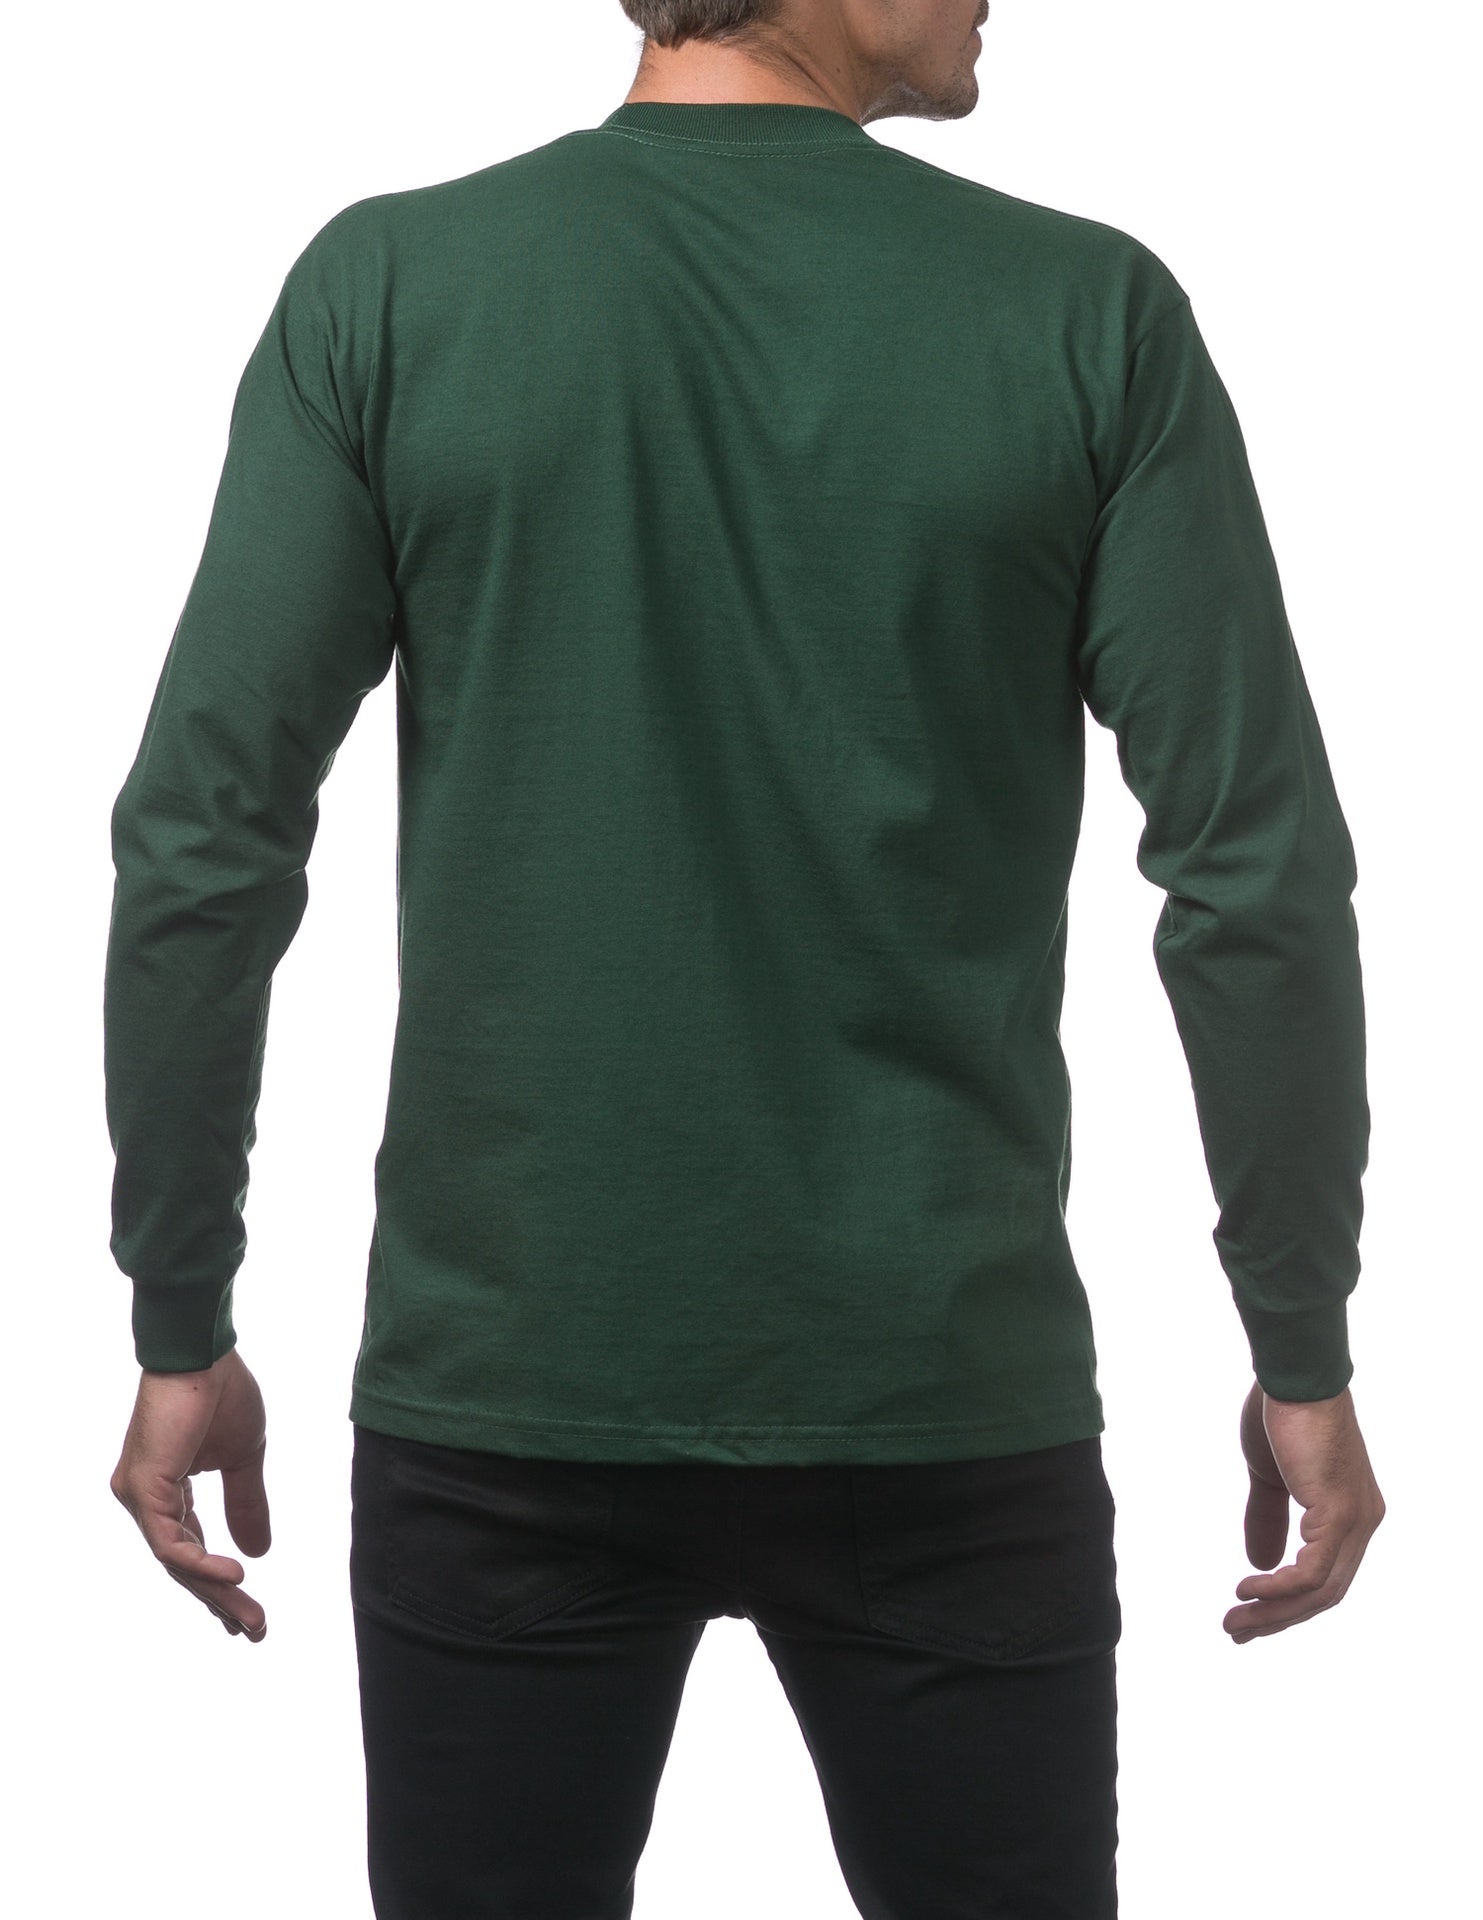 Pro Club Heavyweight Cotton Long Sleeve Crew Neck - FOREST GREEN